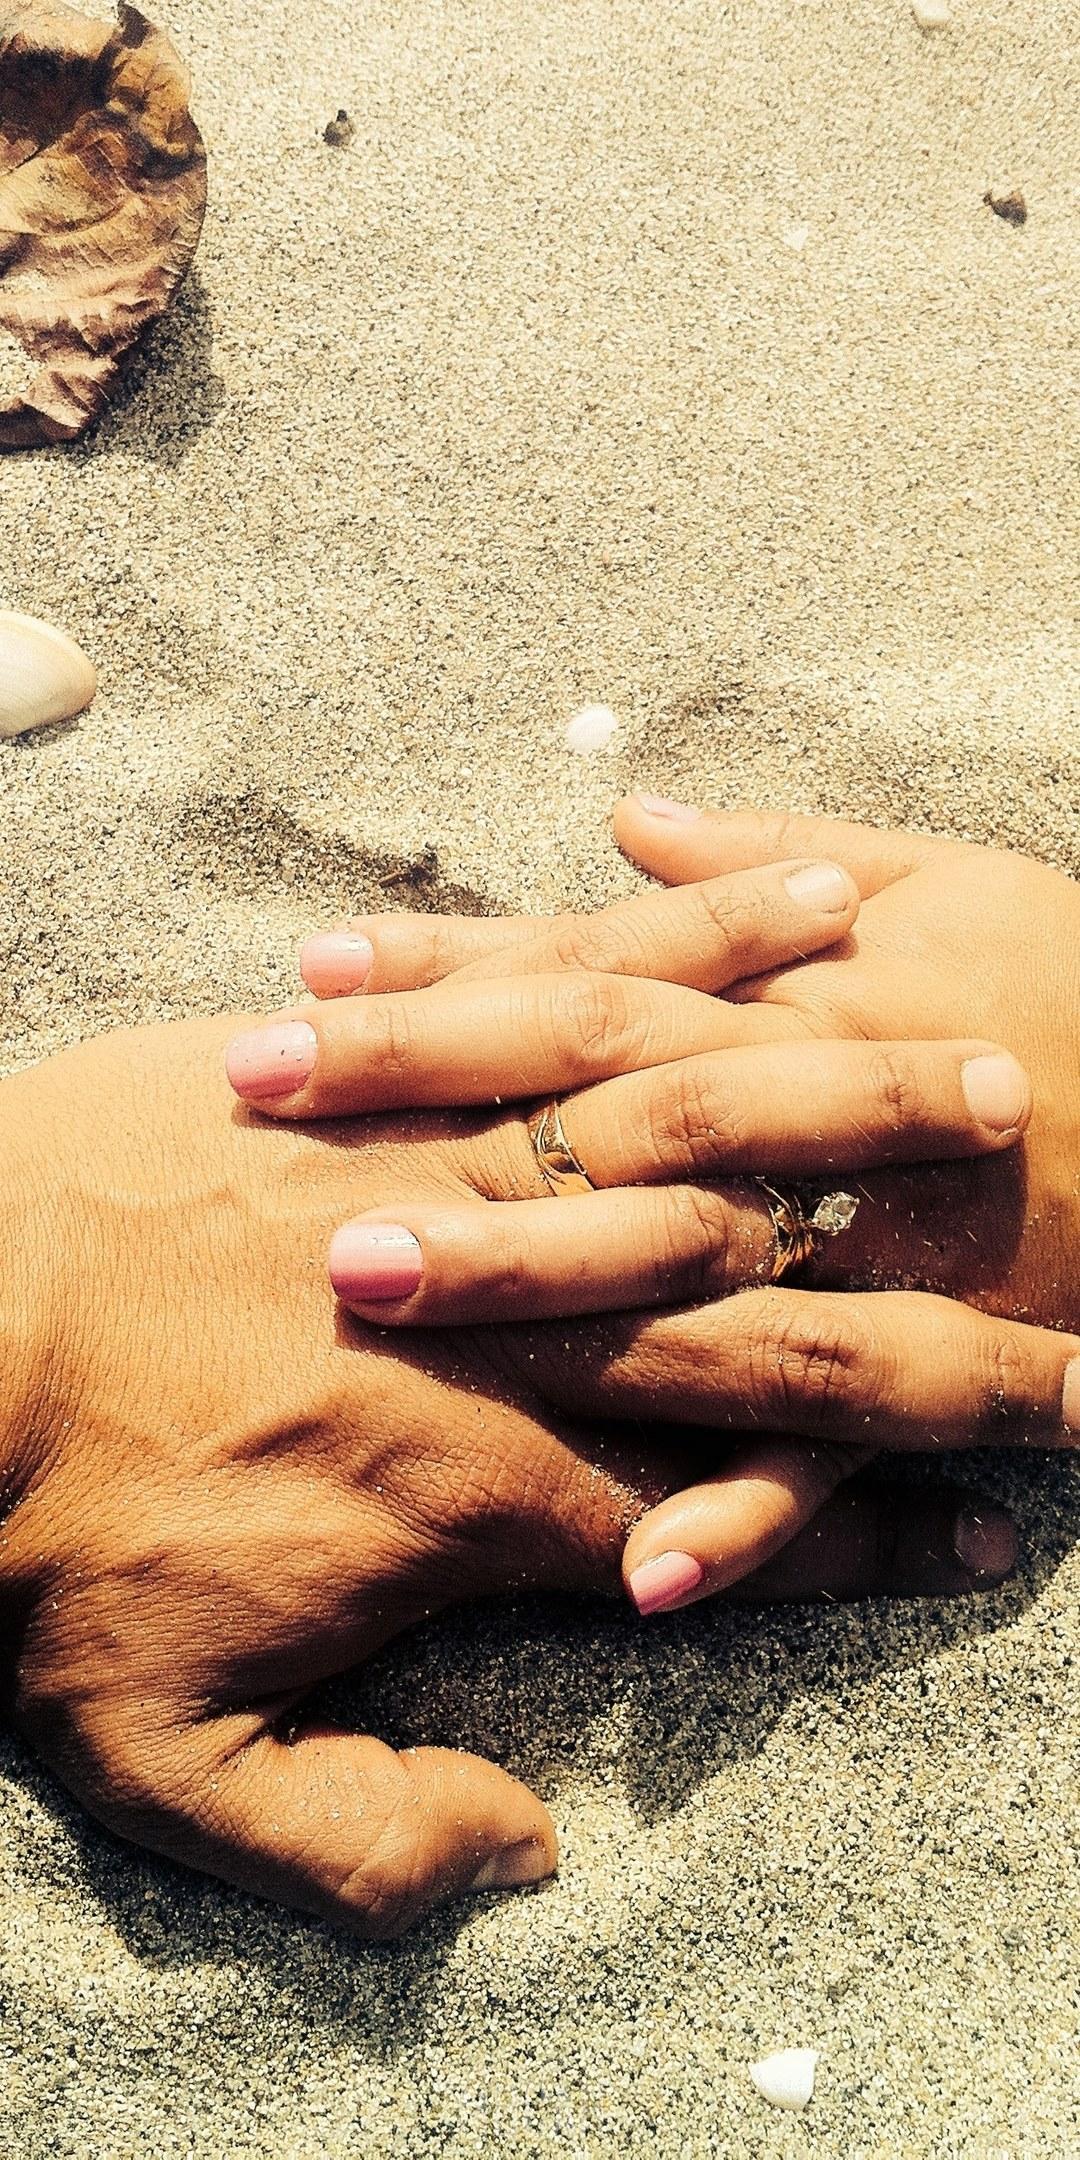 HD wallpaper, Blackberry Evolve Wallpaper Free Download, A Married Couple At The Beach Wearing Wedding Rings Holds Hands On The Sand, Lovers Hands On Sand, 1080X2160